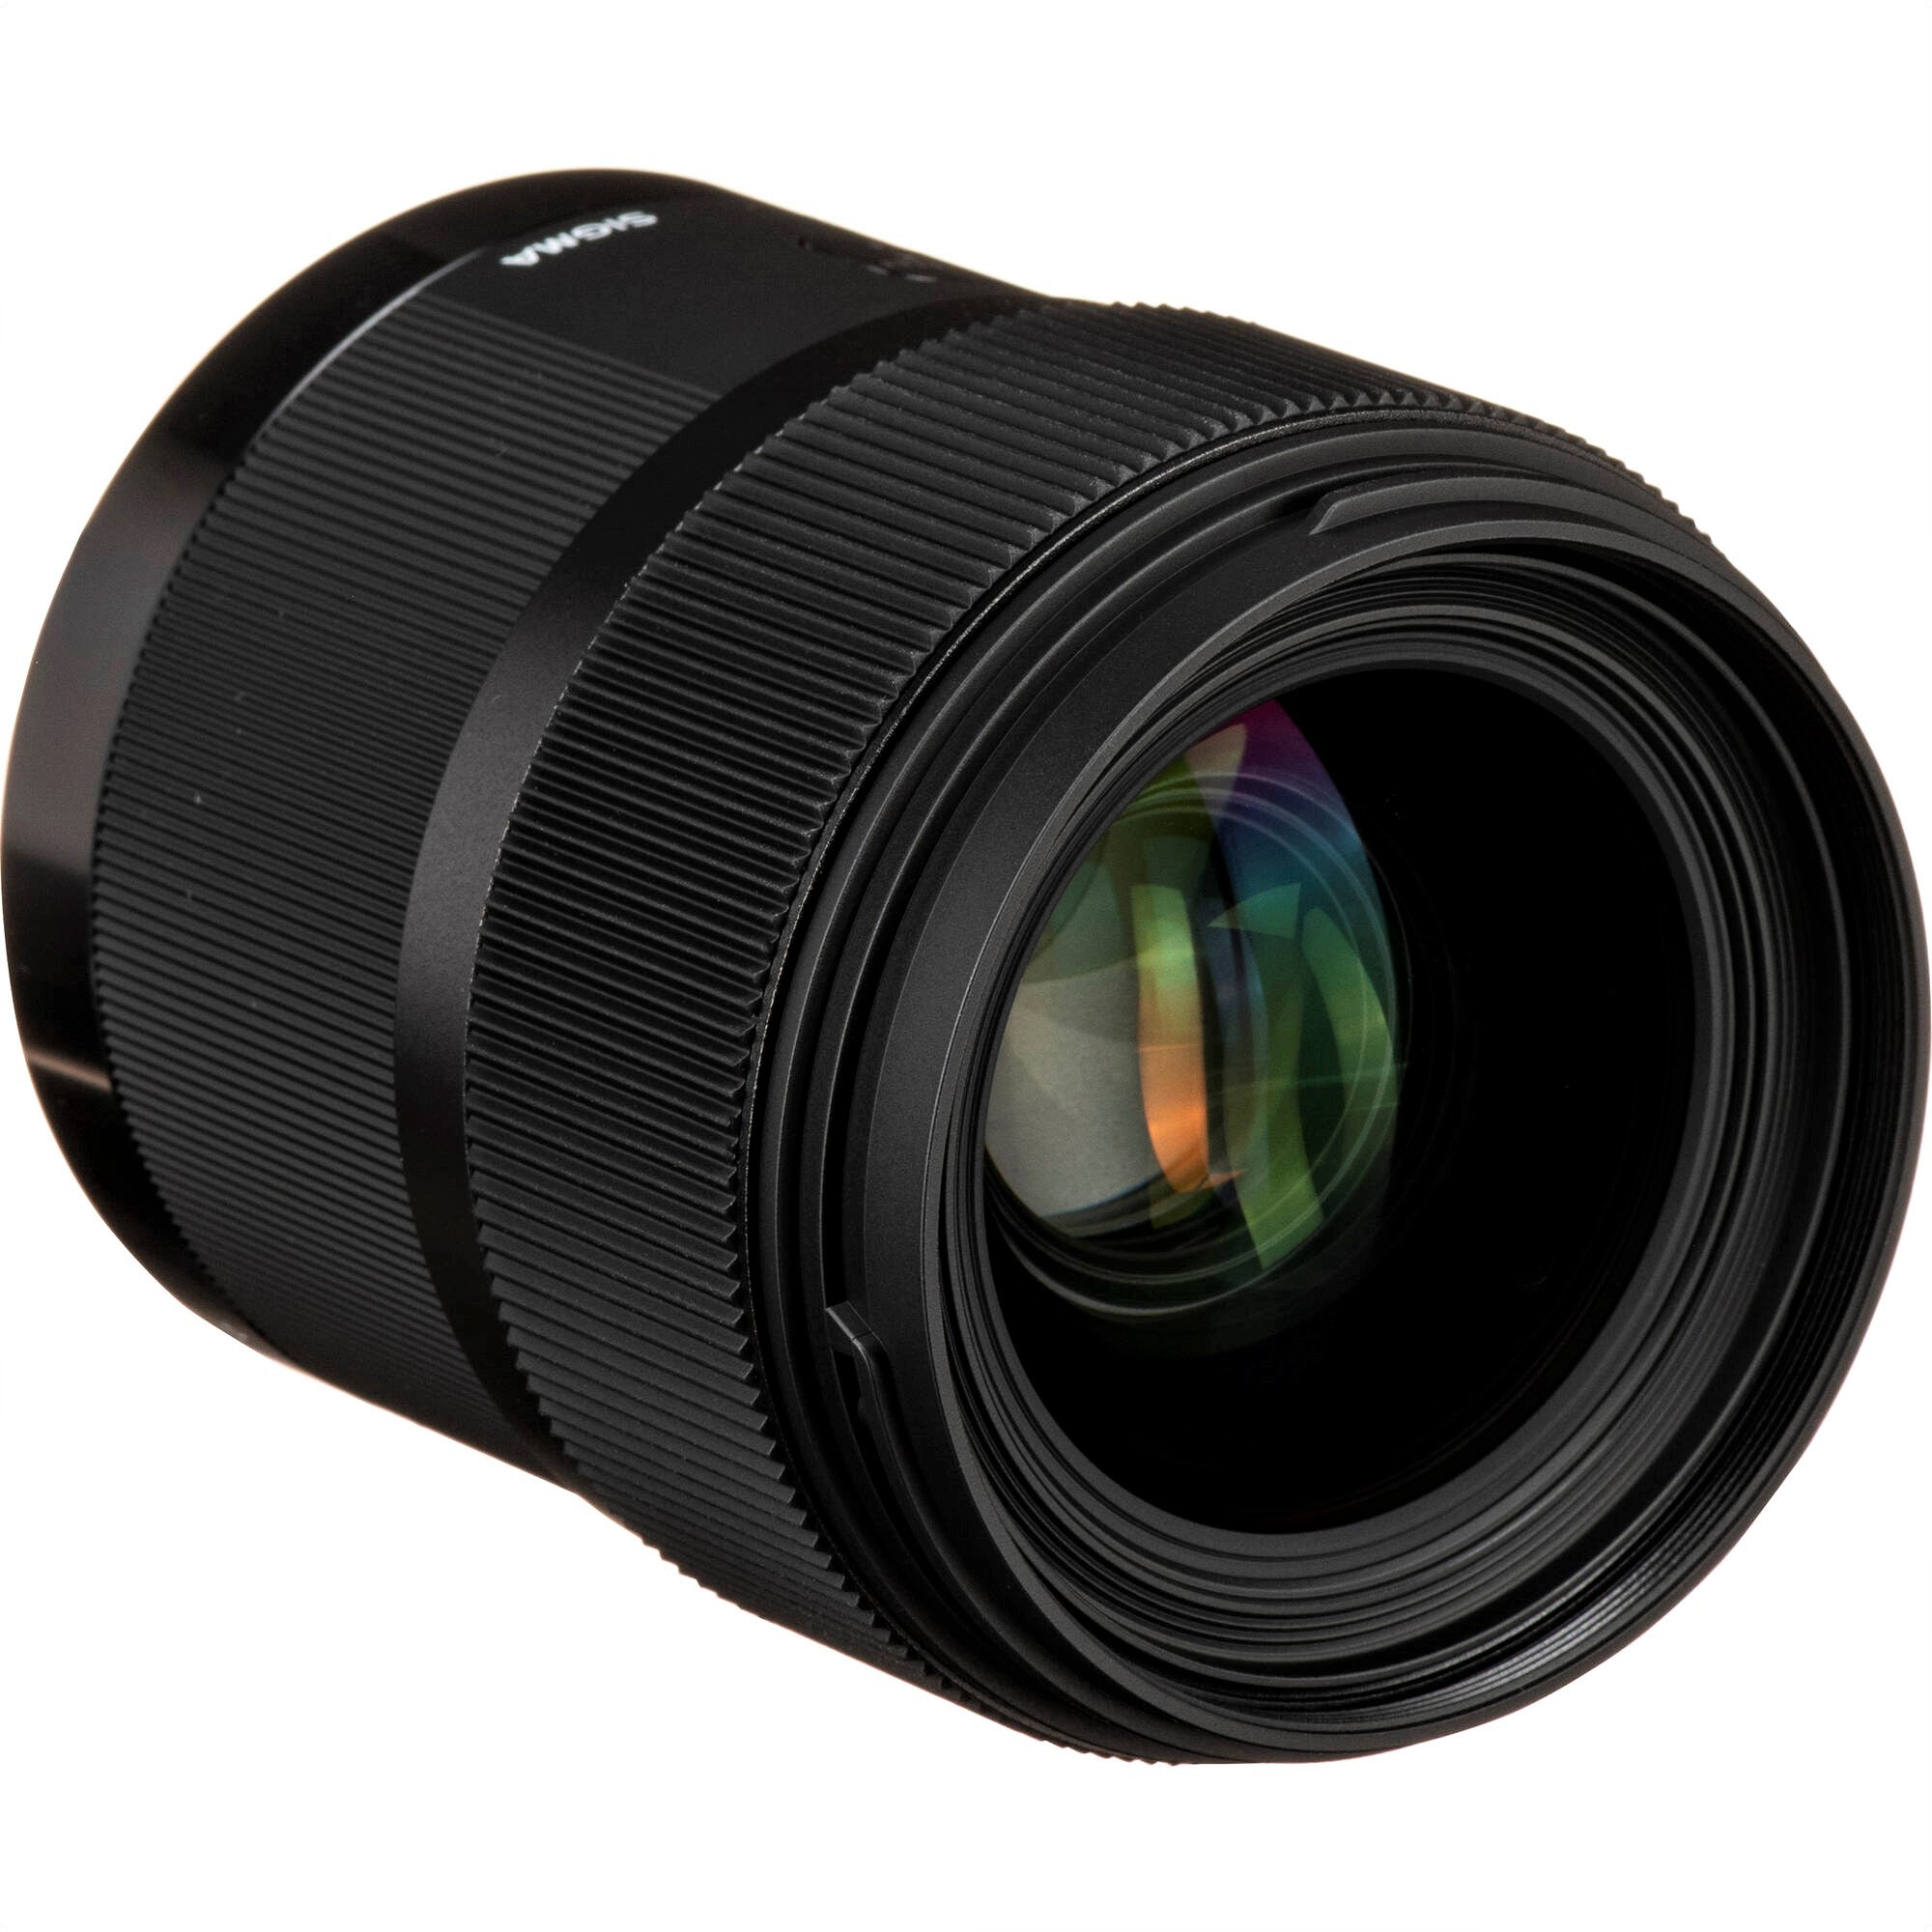 Sigma 35mm F1.4 DG HSM Art Lens for Pentax K in a Front-Side View